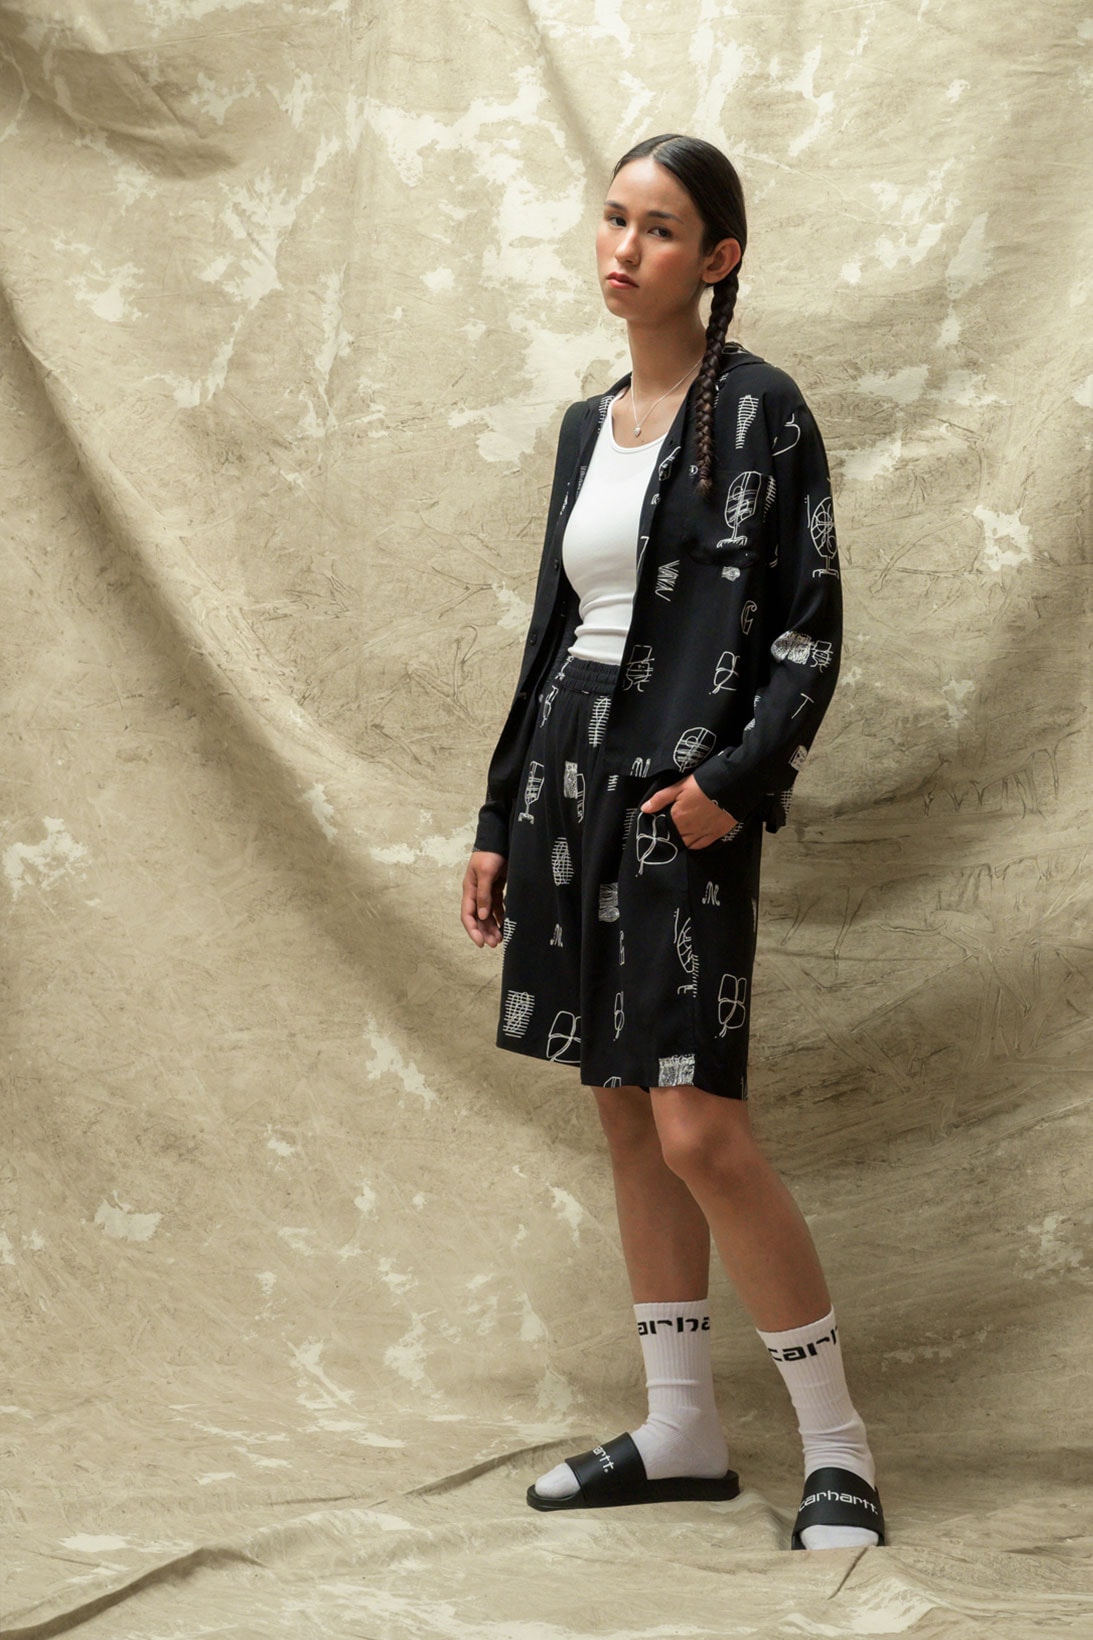 carhartt wip spring summer 2021 ss21 collection lookbook graphic top shirt shorts sandals